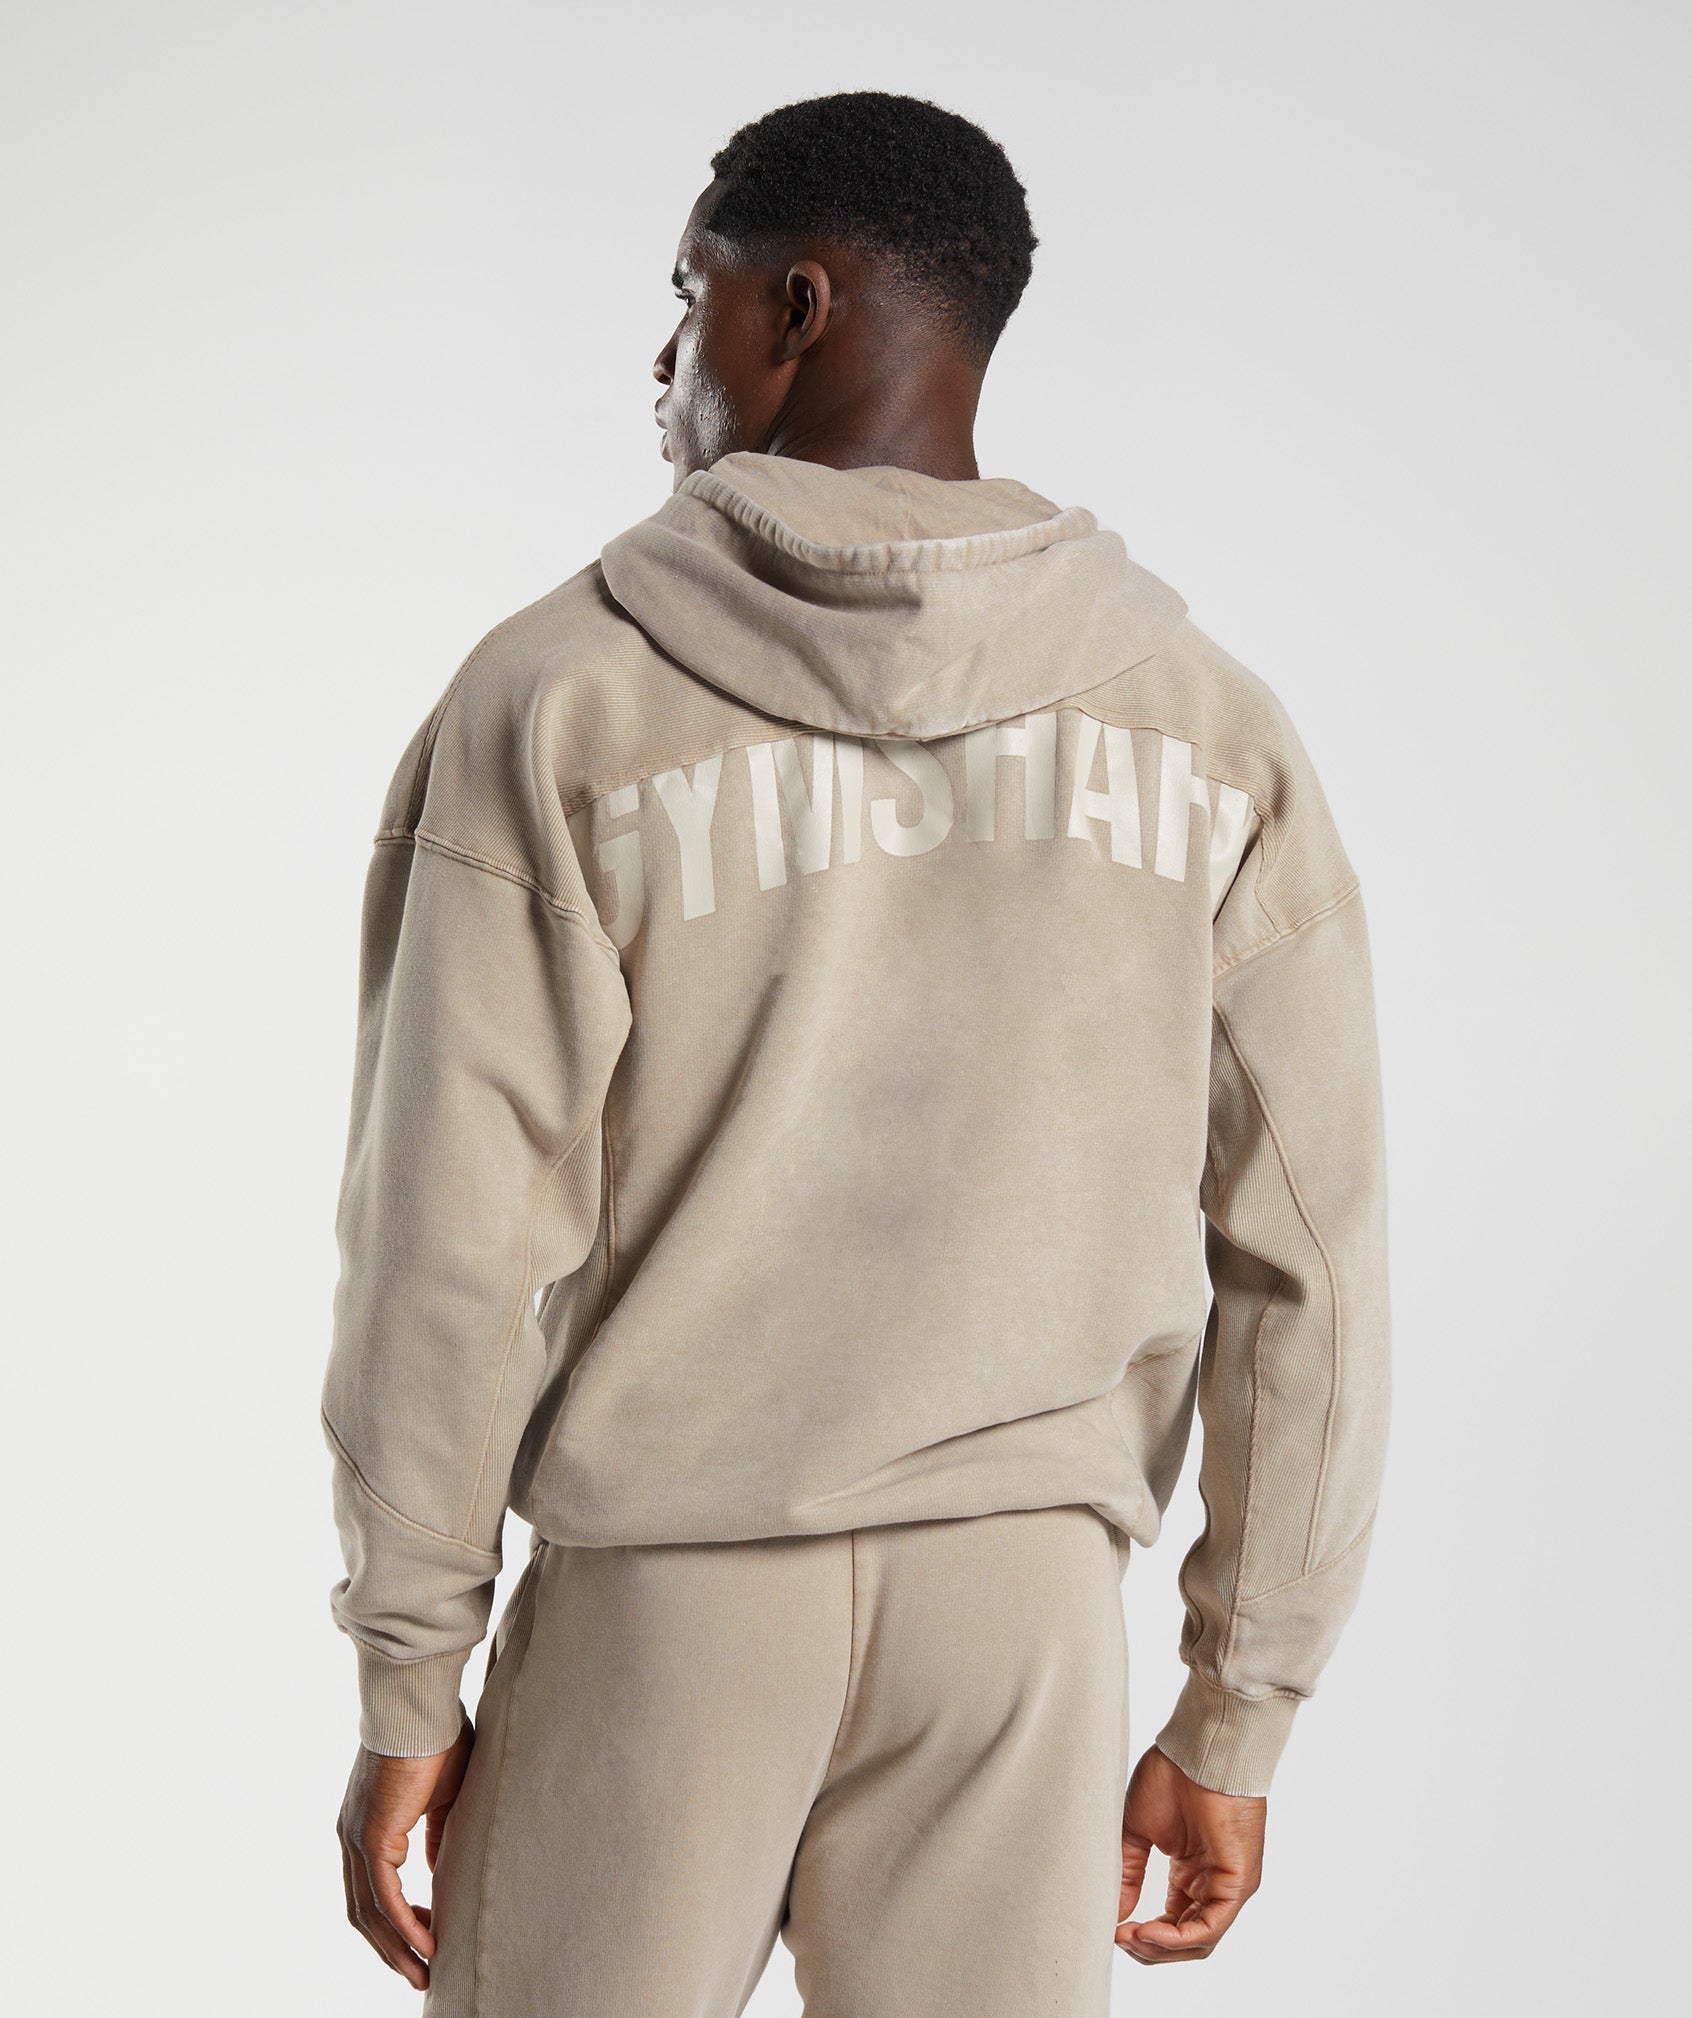 outlet websites (IN SEARCH OF) Gymshark Onyx hoodie quarter zip (XL)